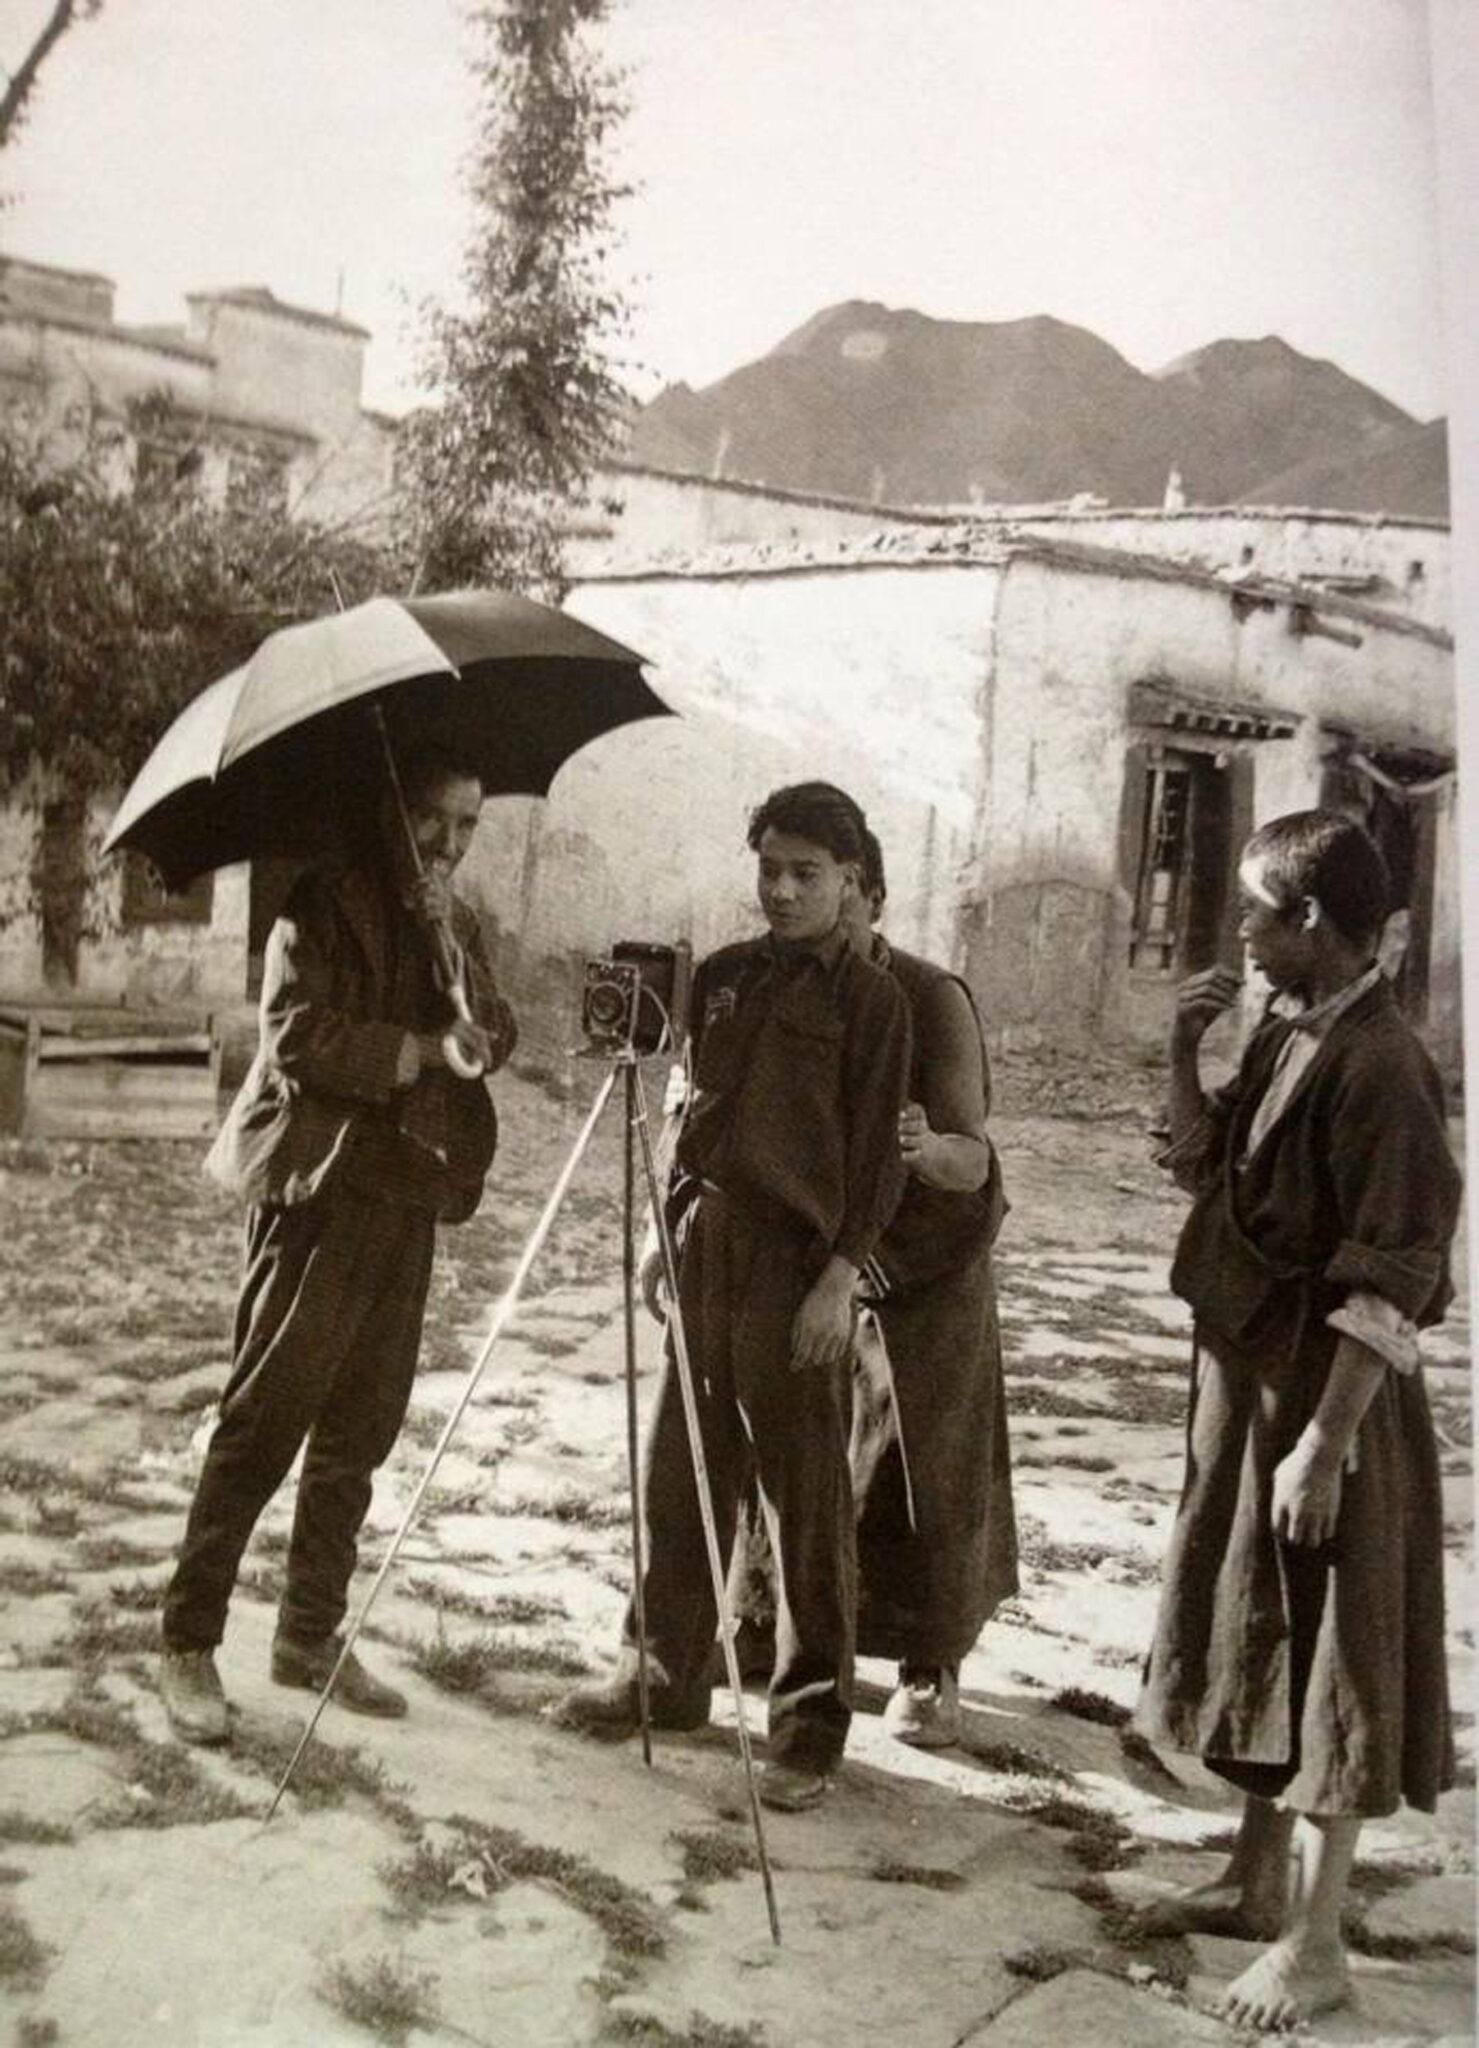 Black and white photograph of four people, one with umbrella, gathering around camera on tripod